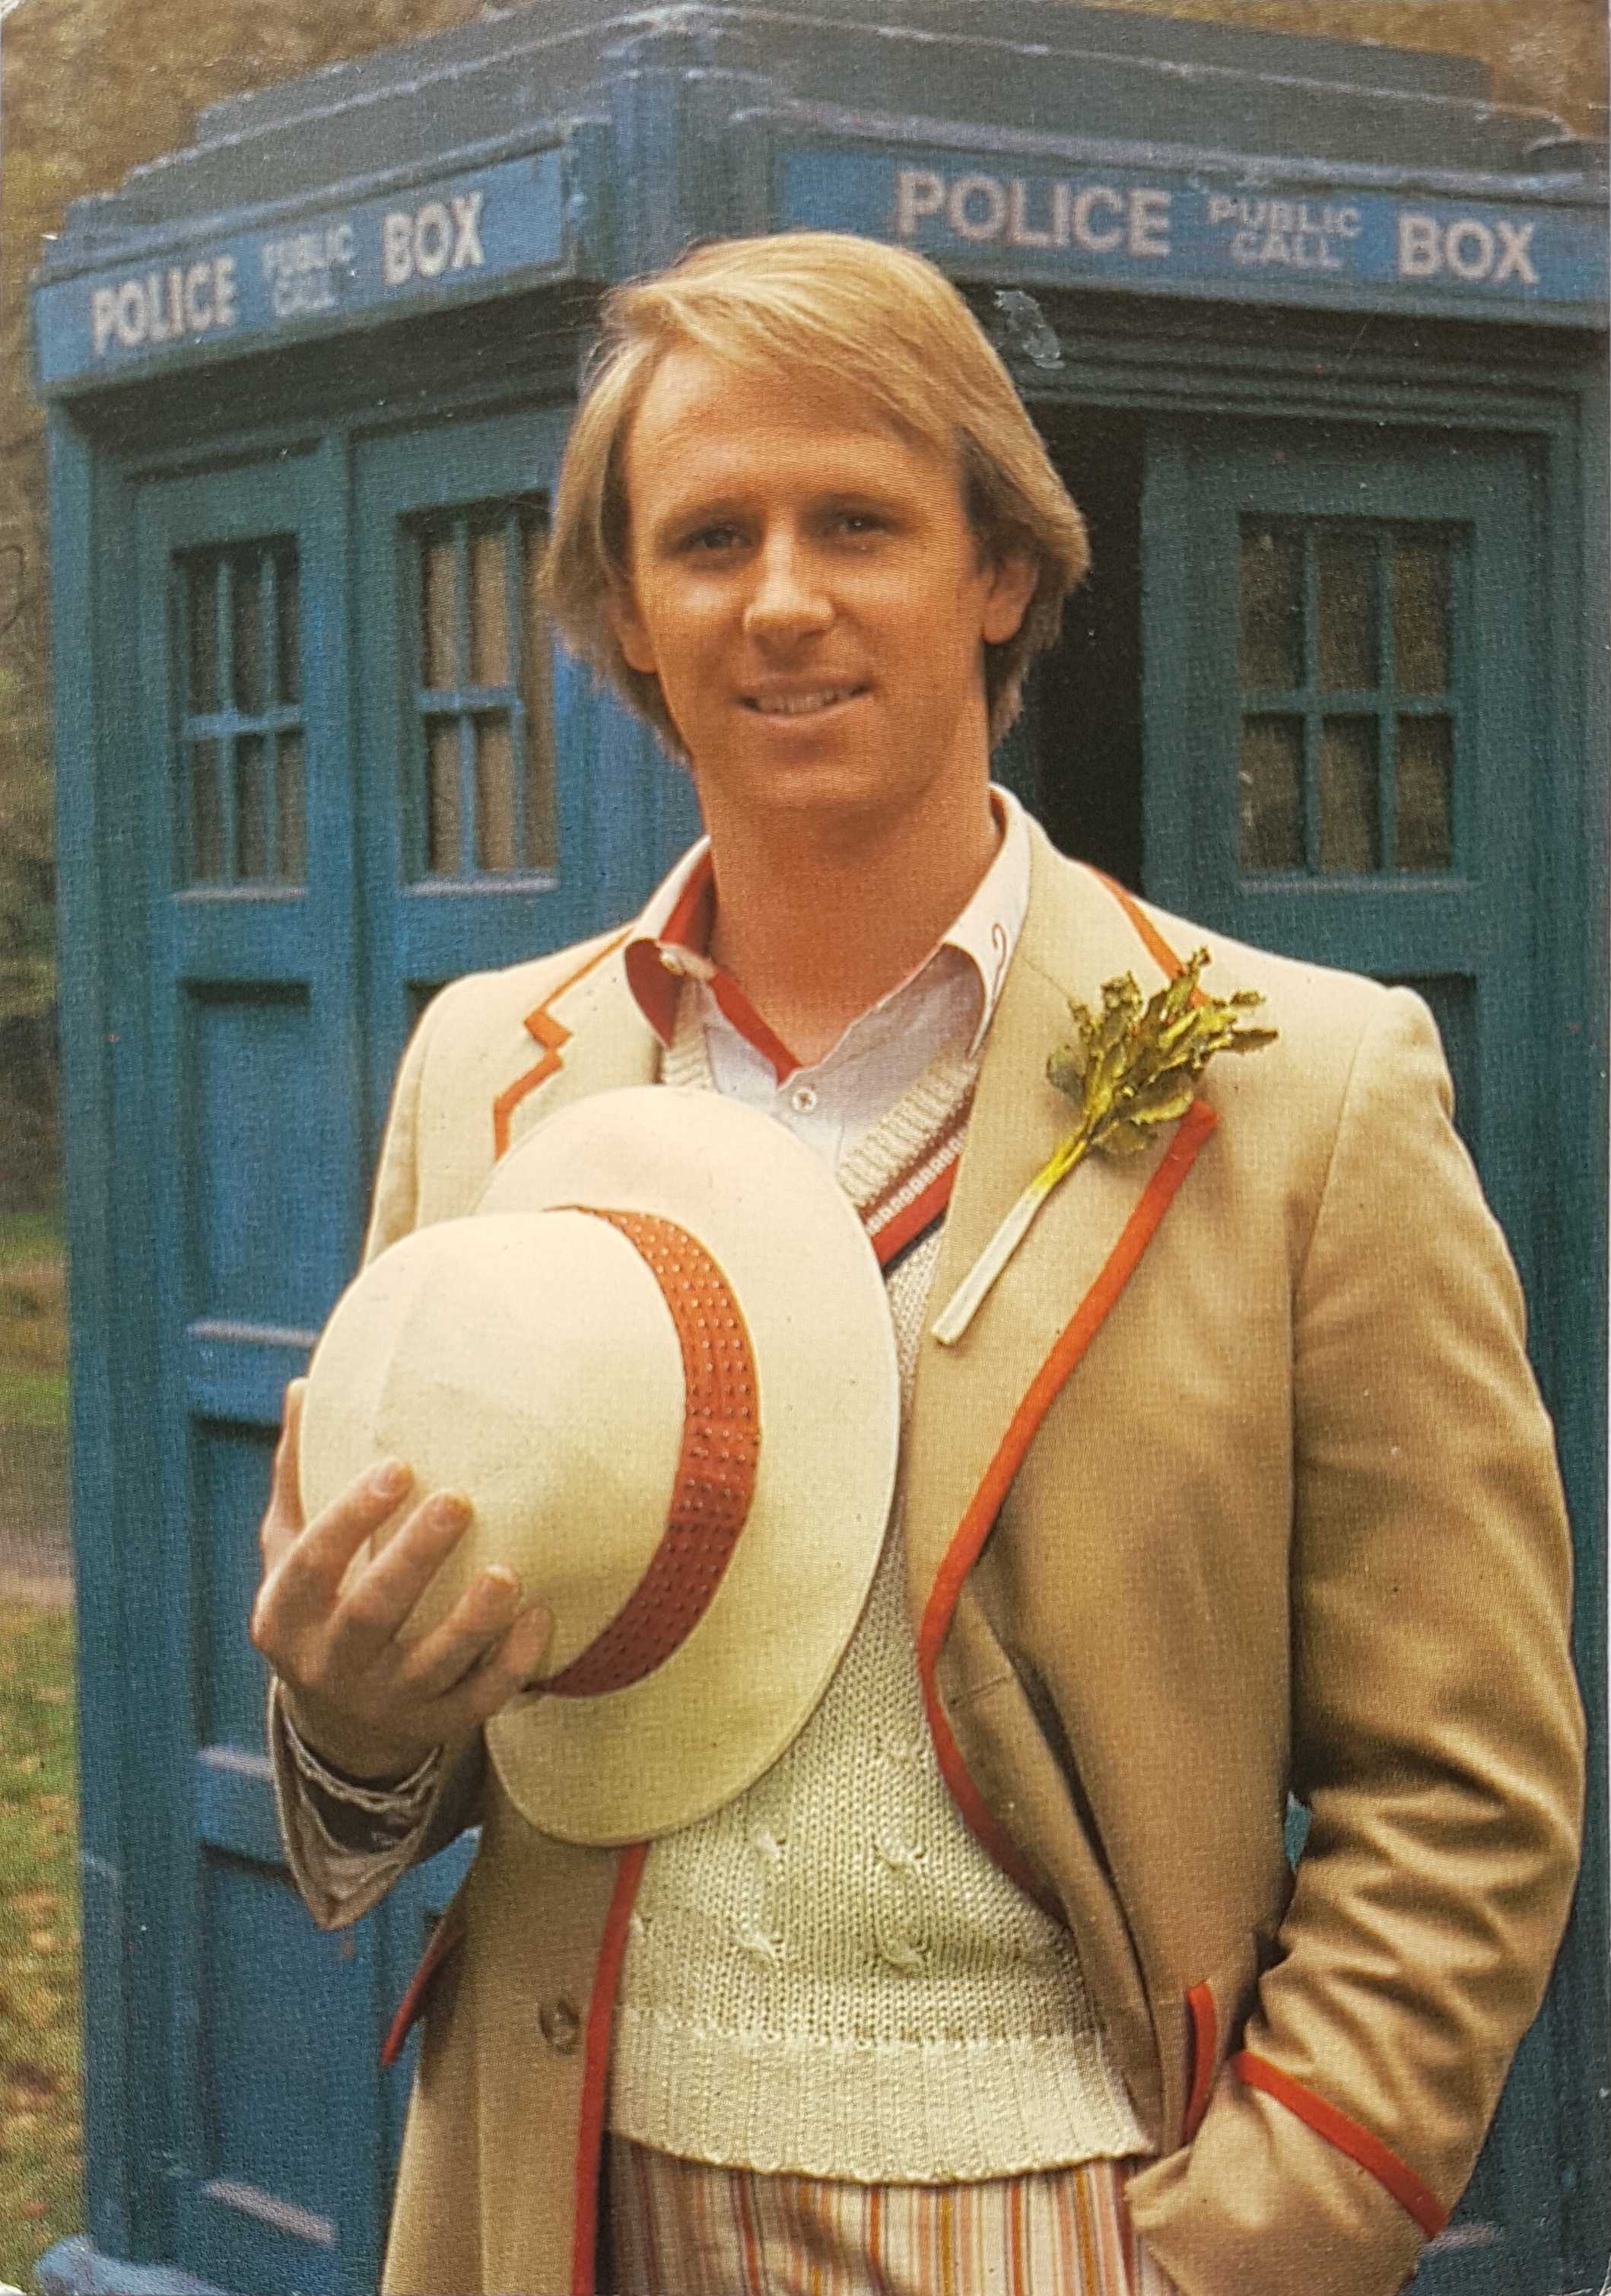 Picture of PC-DW-PD Doctor Who - Peter Davison by artist Unknown from the BBC records and Tapes library